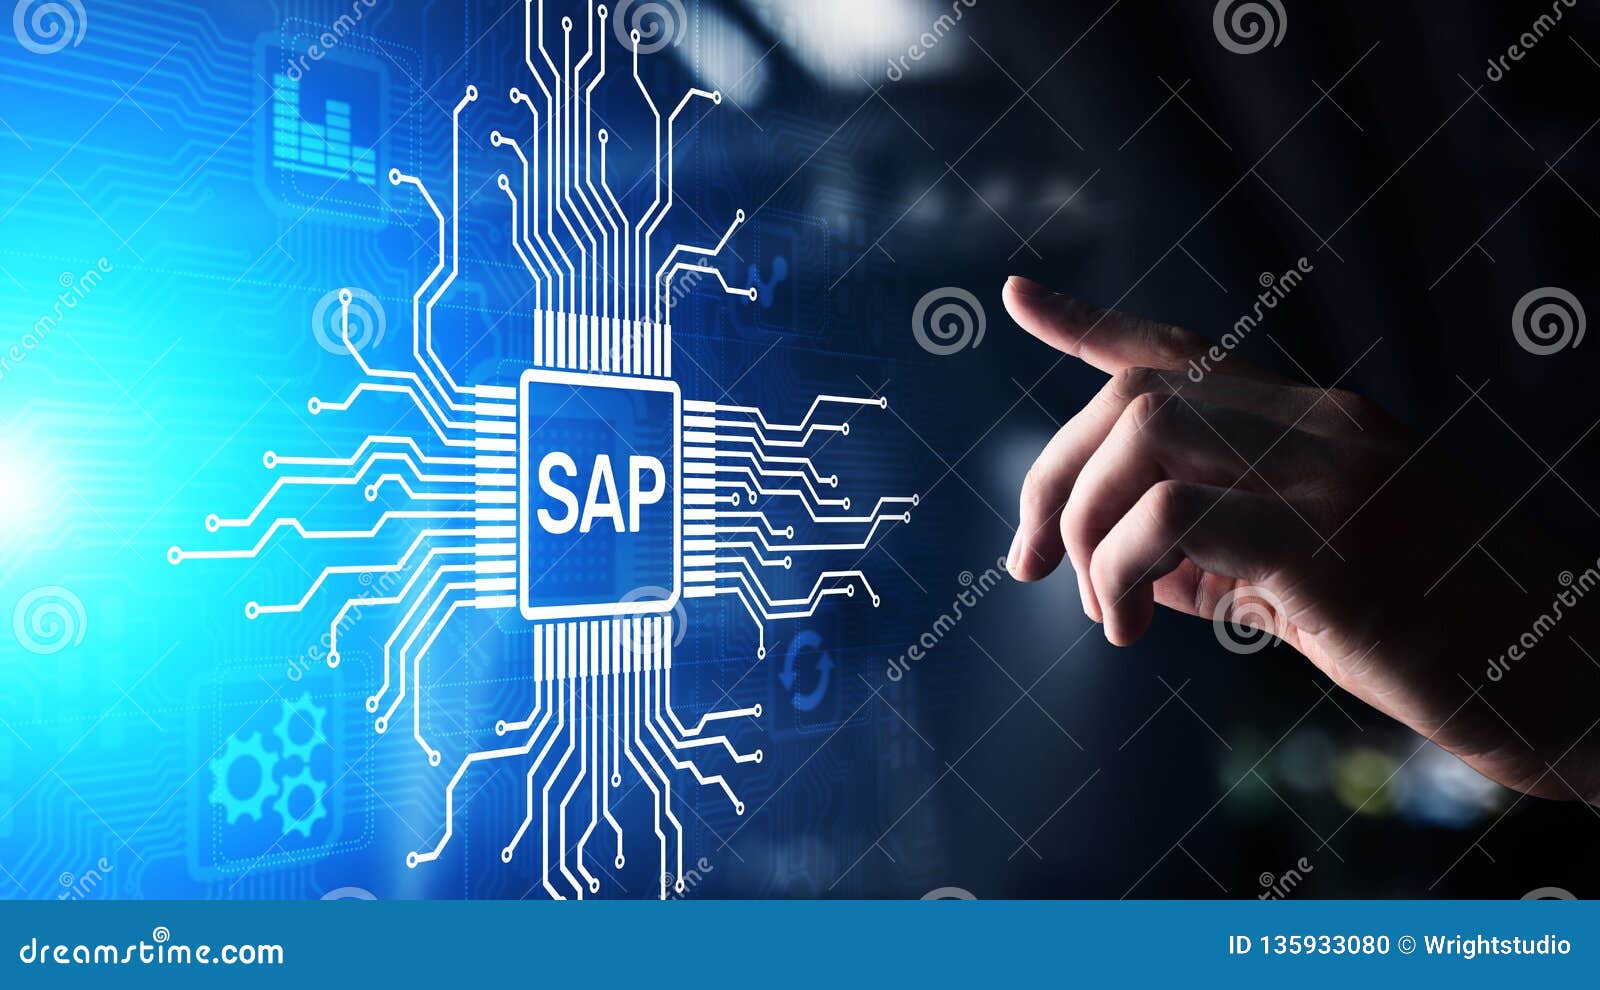 sap - business process automation software. erp enterprise resources planning system concept on virtual screen.